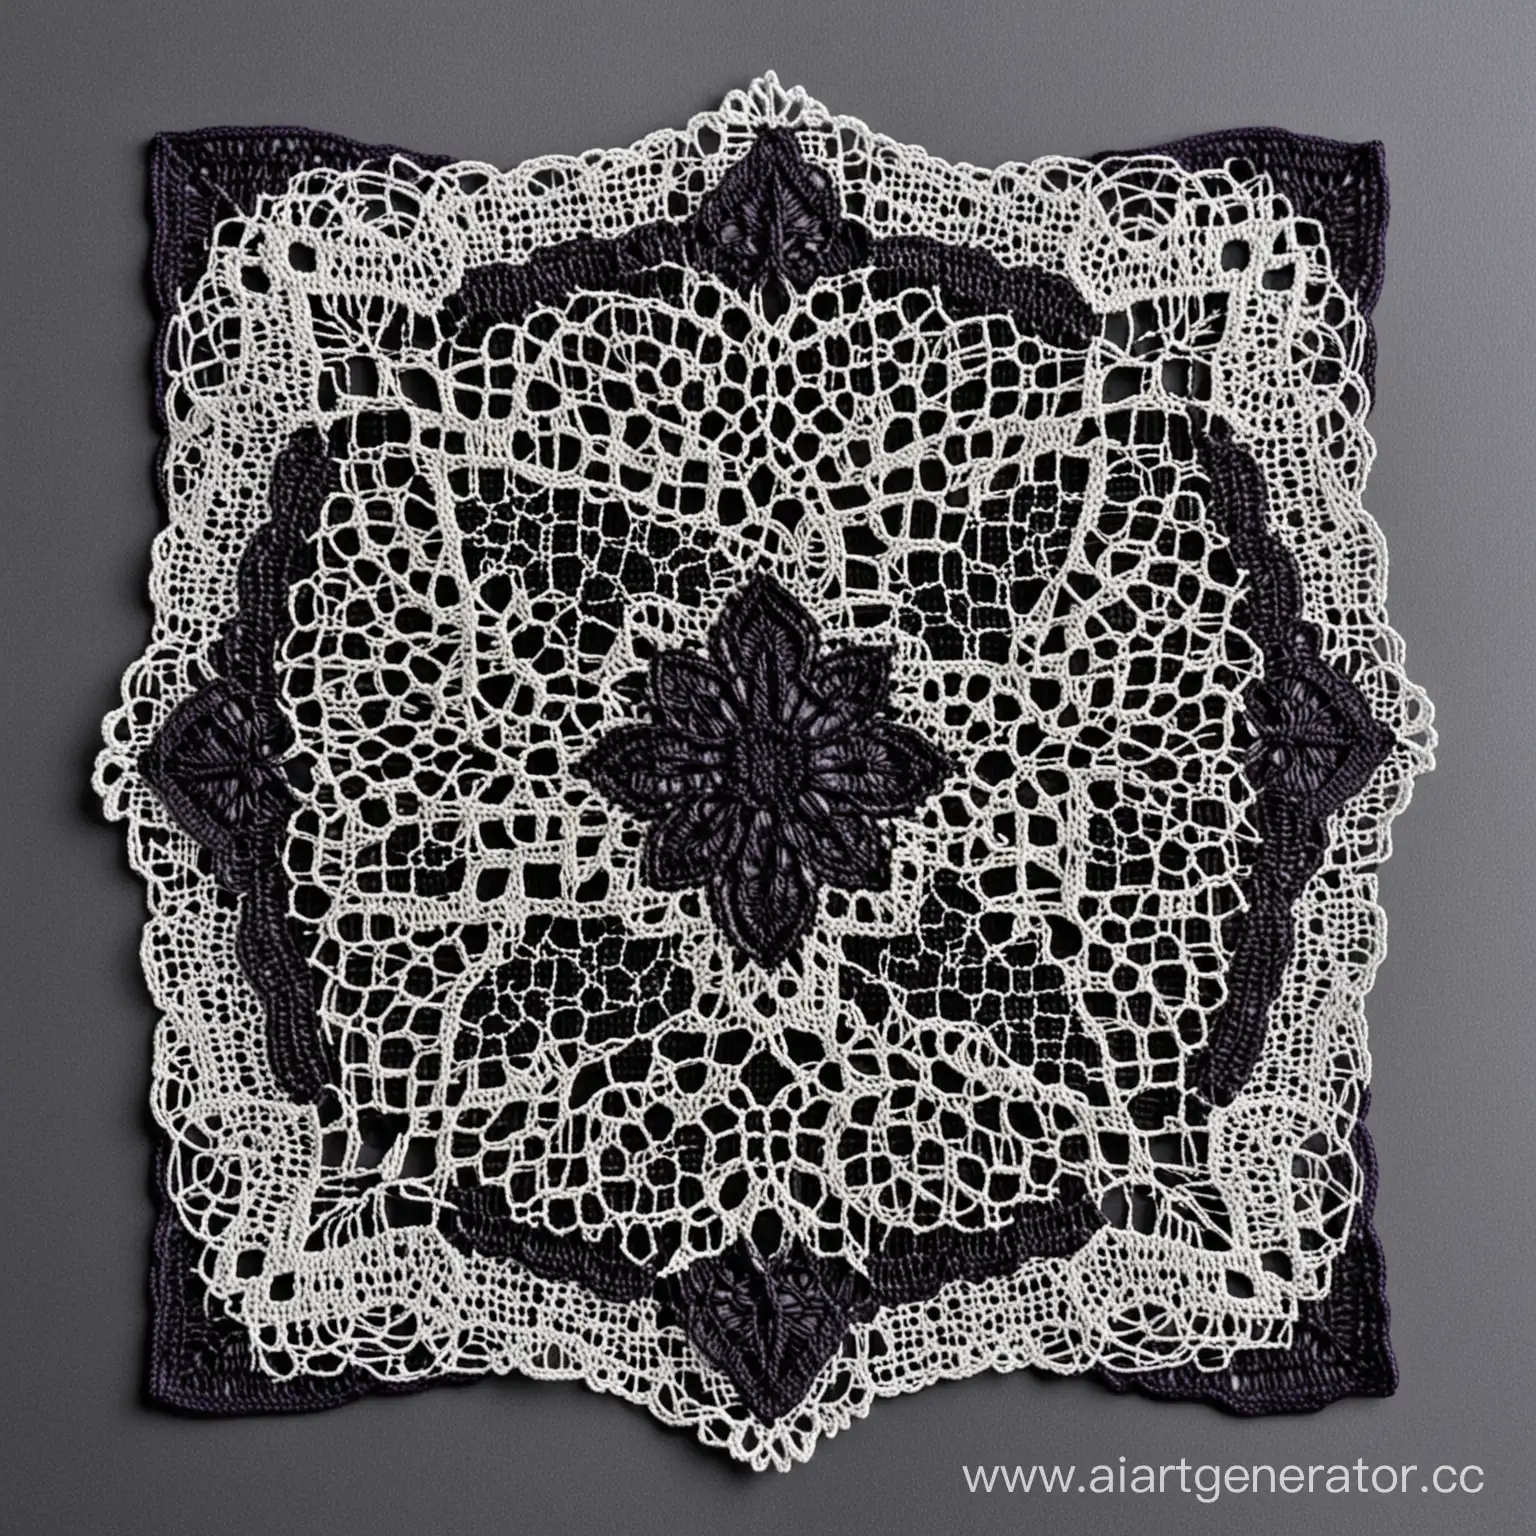 Overhead-View-of-Intricate-Dark-Purple-Crocheted-Lace-Napkin-with-Romanian-and-Irish-Lace-Patterns